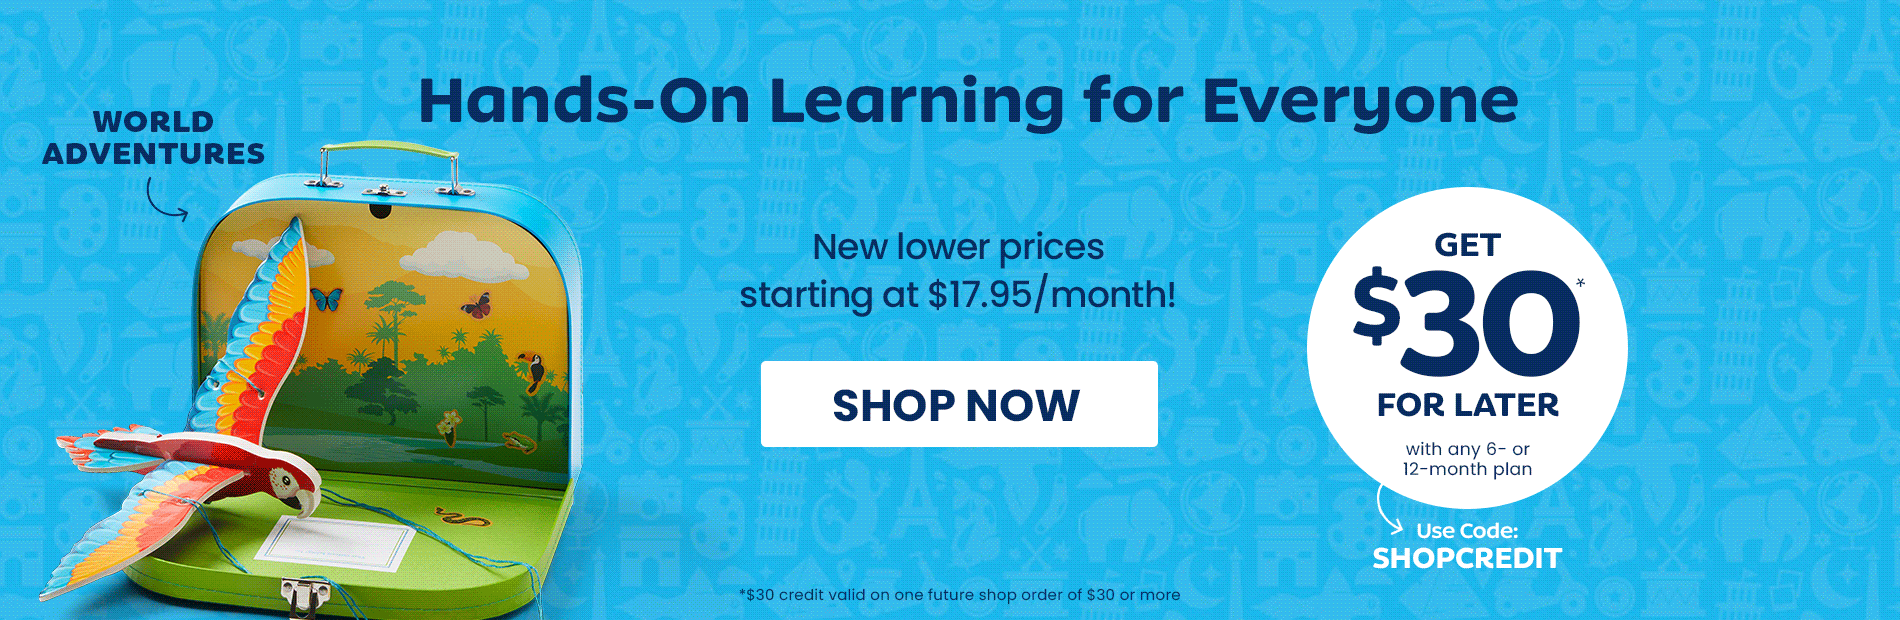 Hands-on learning for everyone. New lower prices starting at $17.95/month! Shop now. $30 credit valid on one future shop order of $30 or more. Get $30 for later with any 6- or 12-month plan. Use code SHOPCREDIT